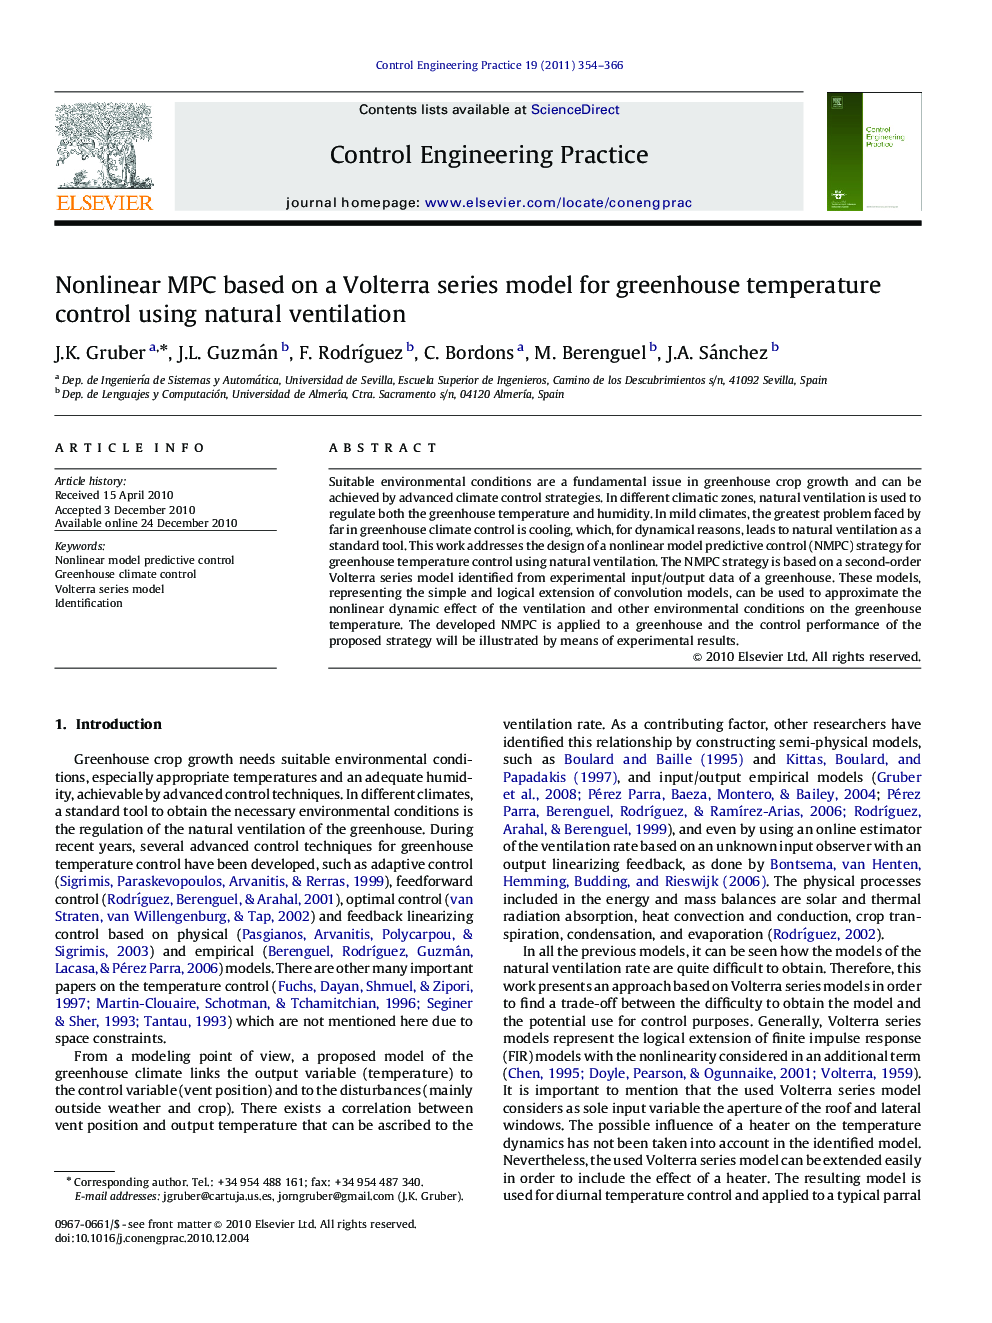 Nonlinear MPC based on a Volterra series model for greenhouse temperature control using natural ventilation